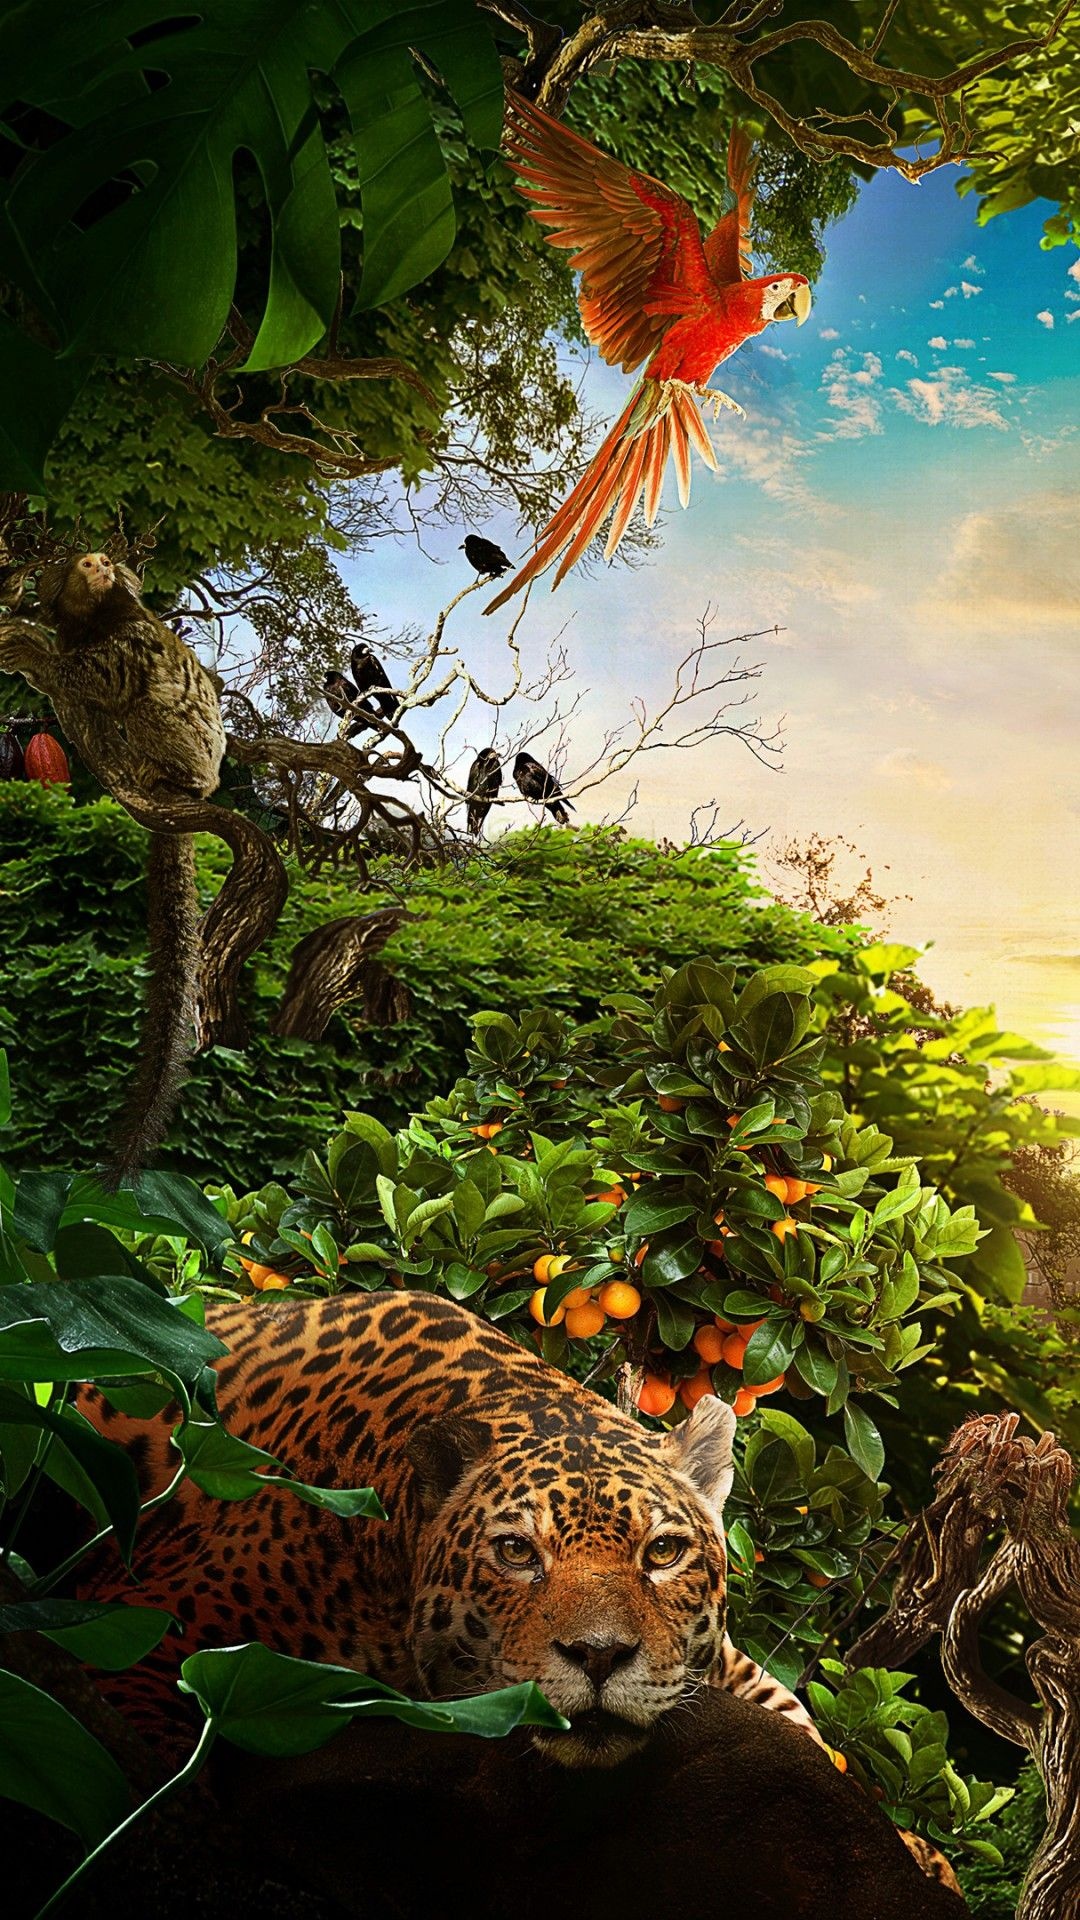 Jungle Animal, Jungle-themed iPhone wallpapers, Tropical beauty, Nature on your screen, 1080x1920 Full HD Phone